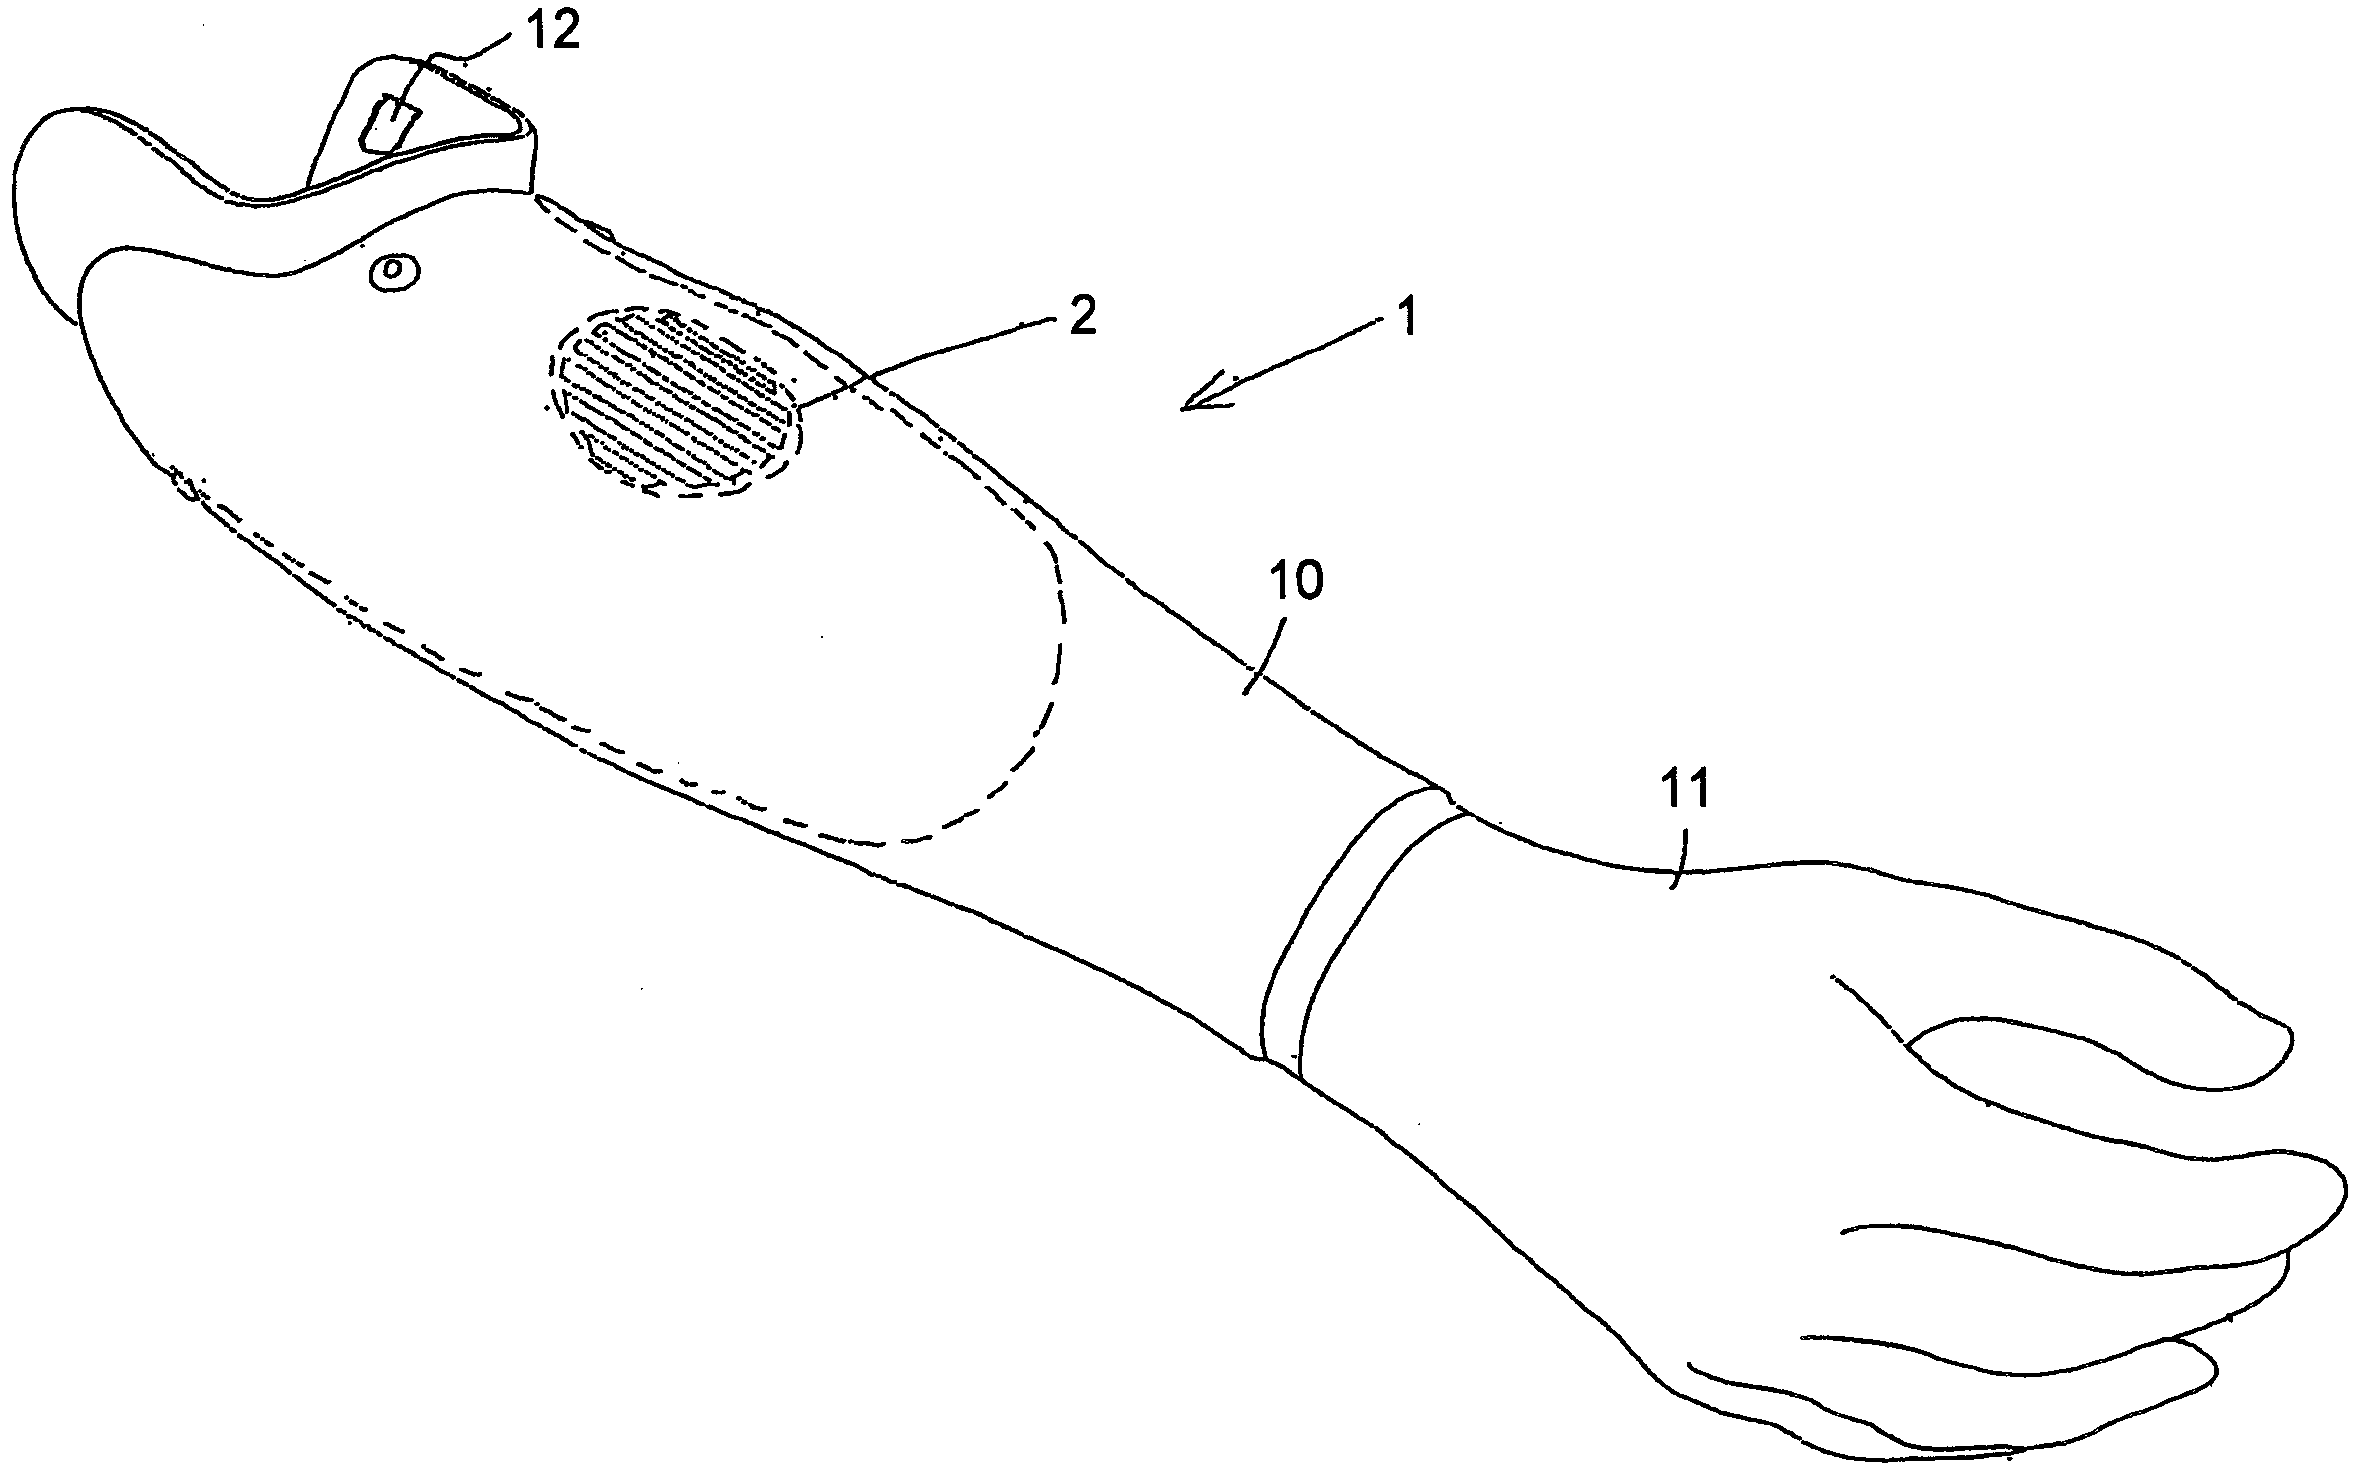 Method for setting up a control and technical orthopedic device